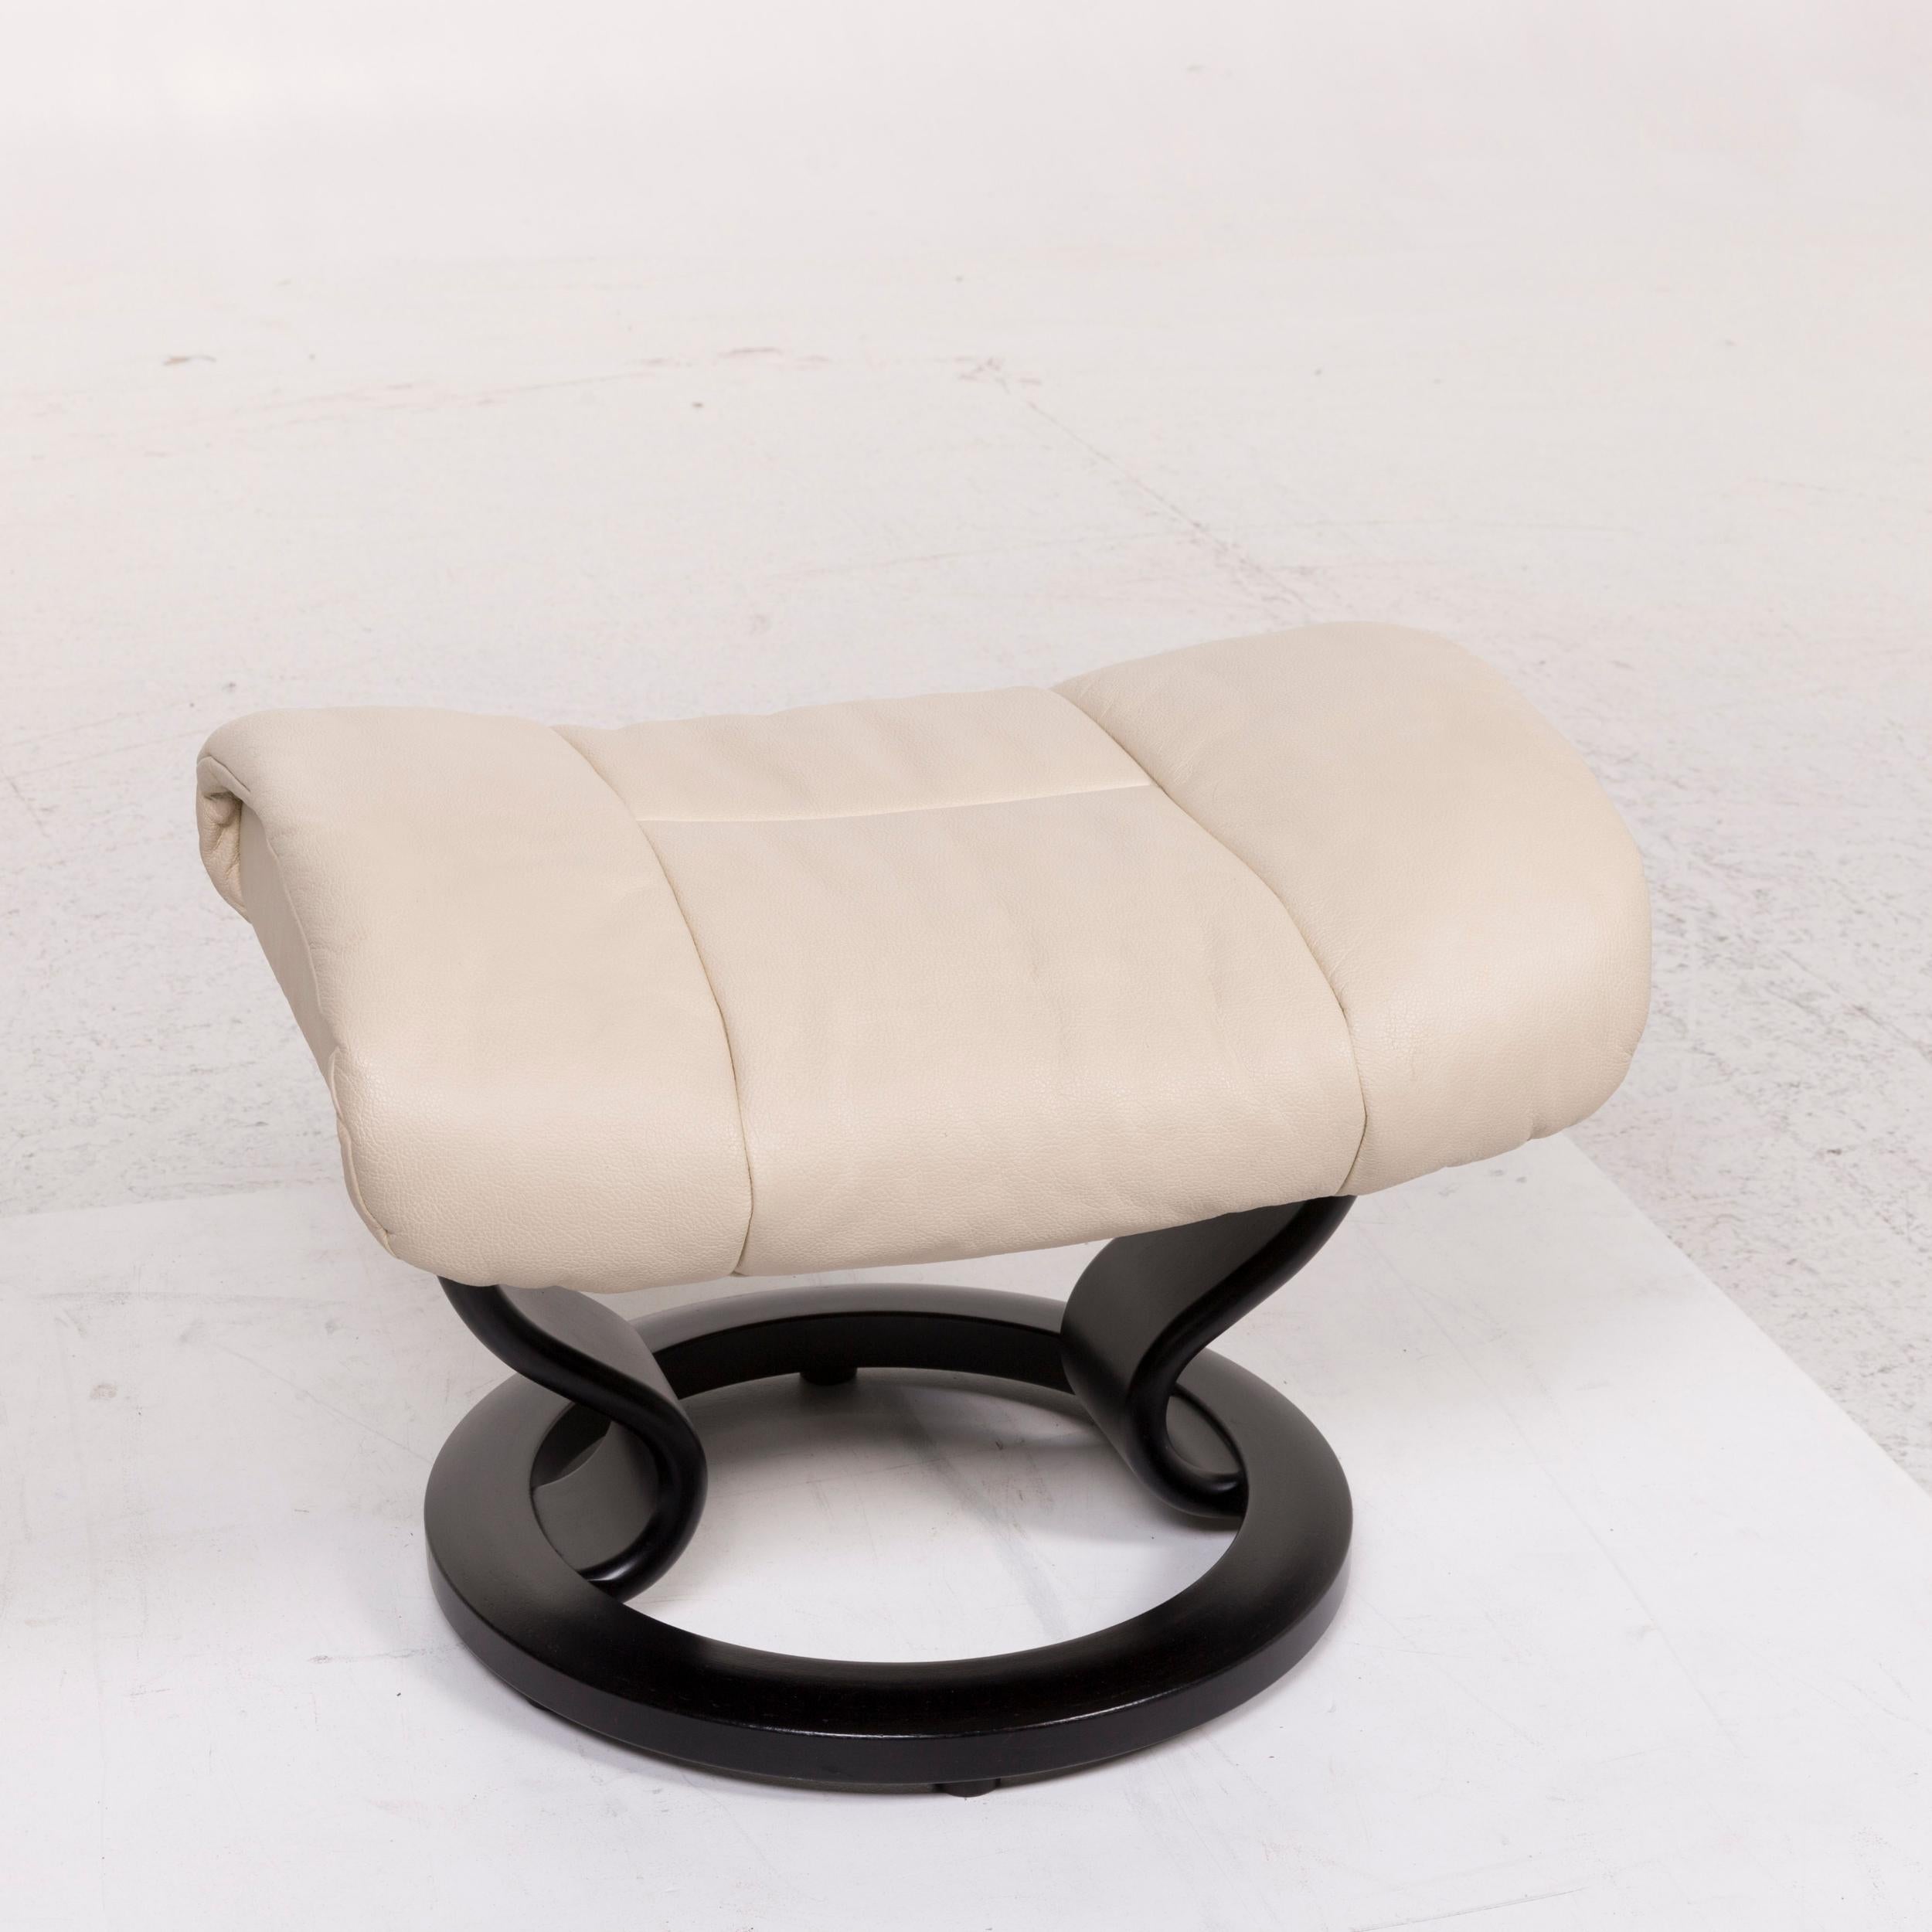 Stressless Reno Leather Armchair Cream Incl. Stool 5